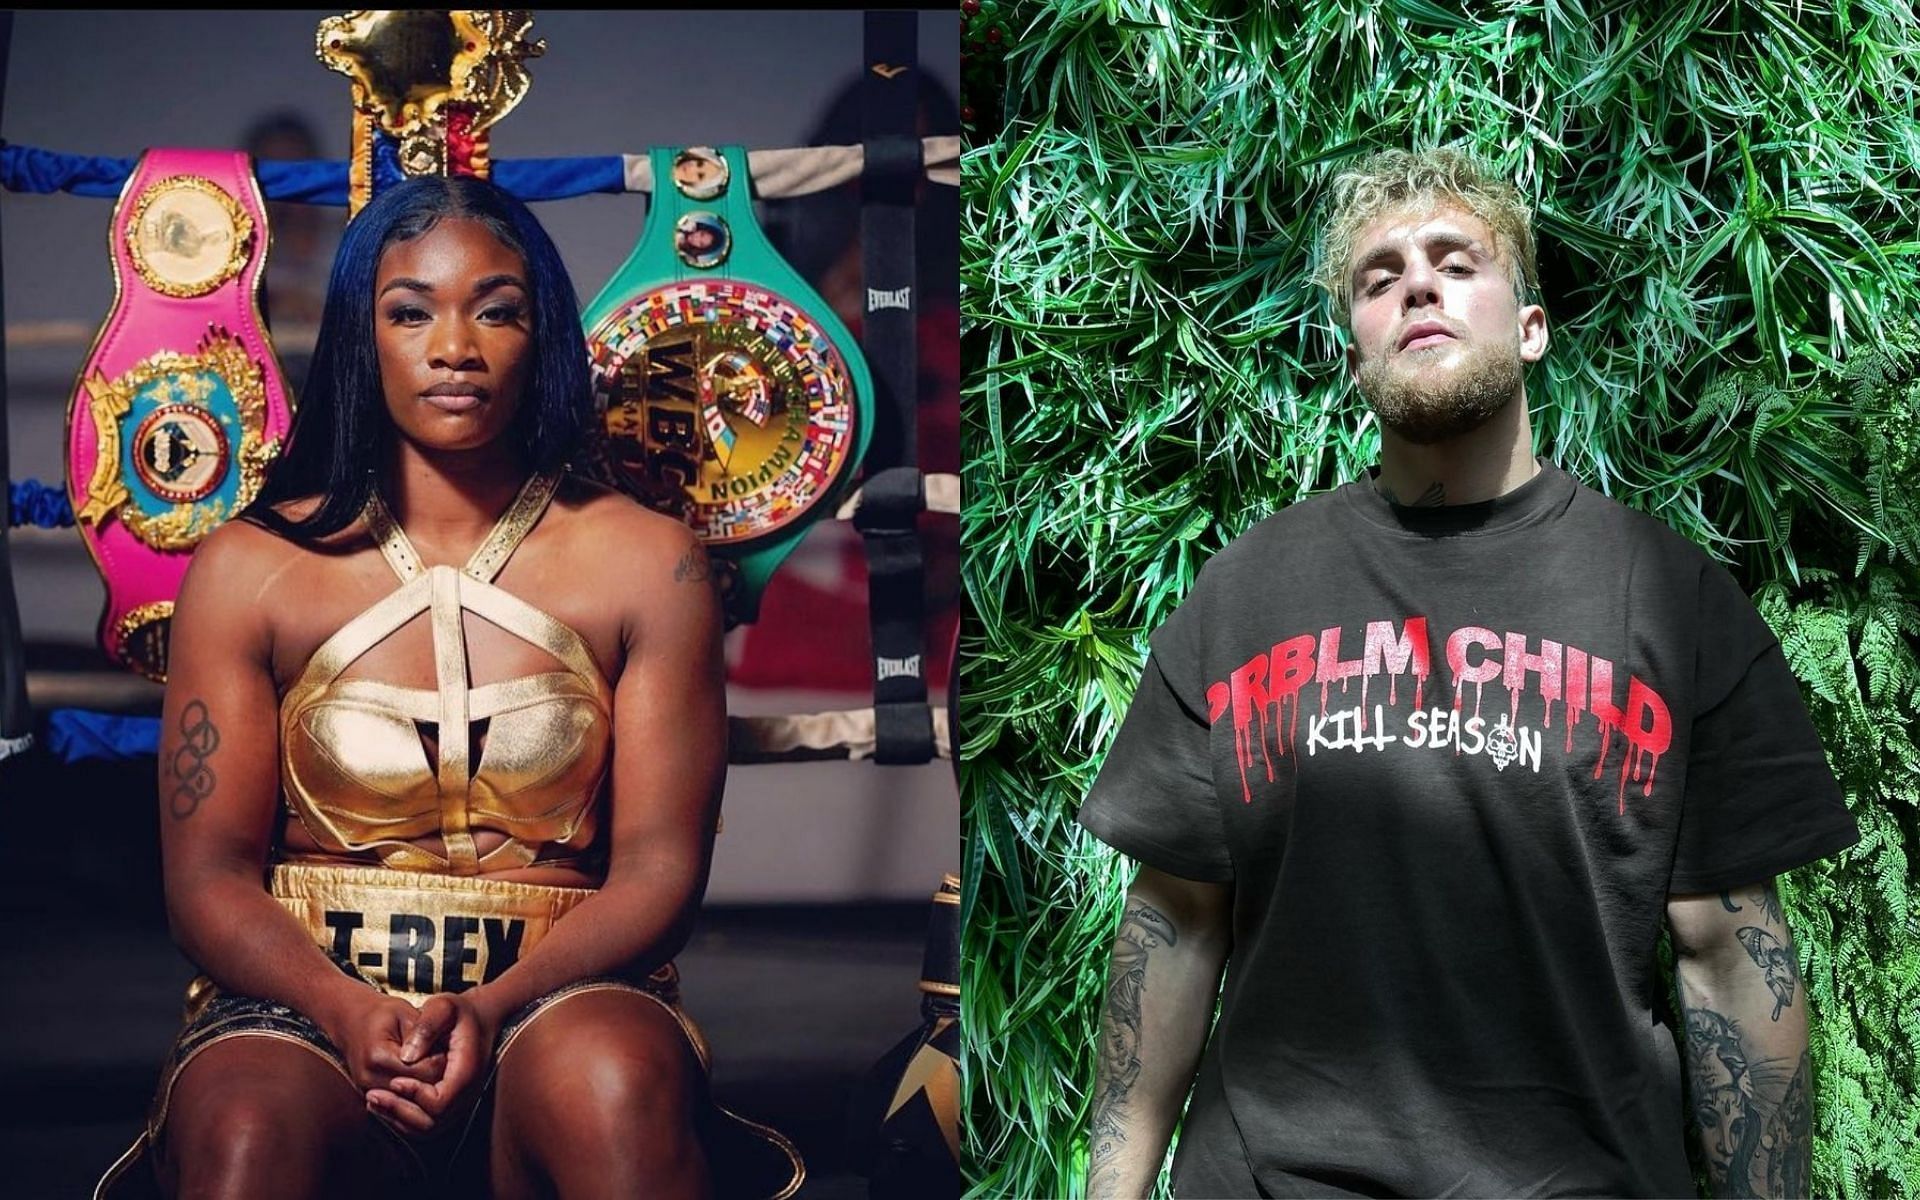 Claressa Shields (left) and Jake Paul (right) [Image Courtesy: @claressashields and @jakepaul on Instagram]